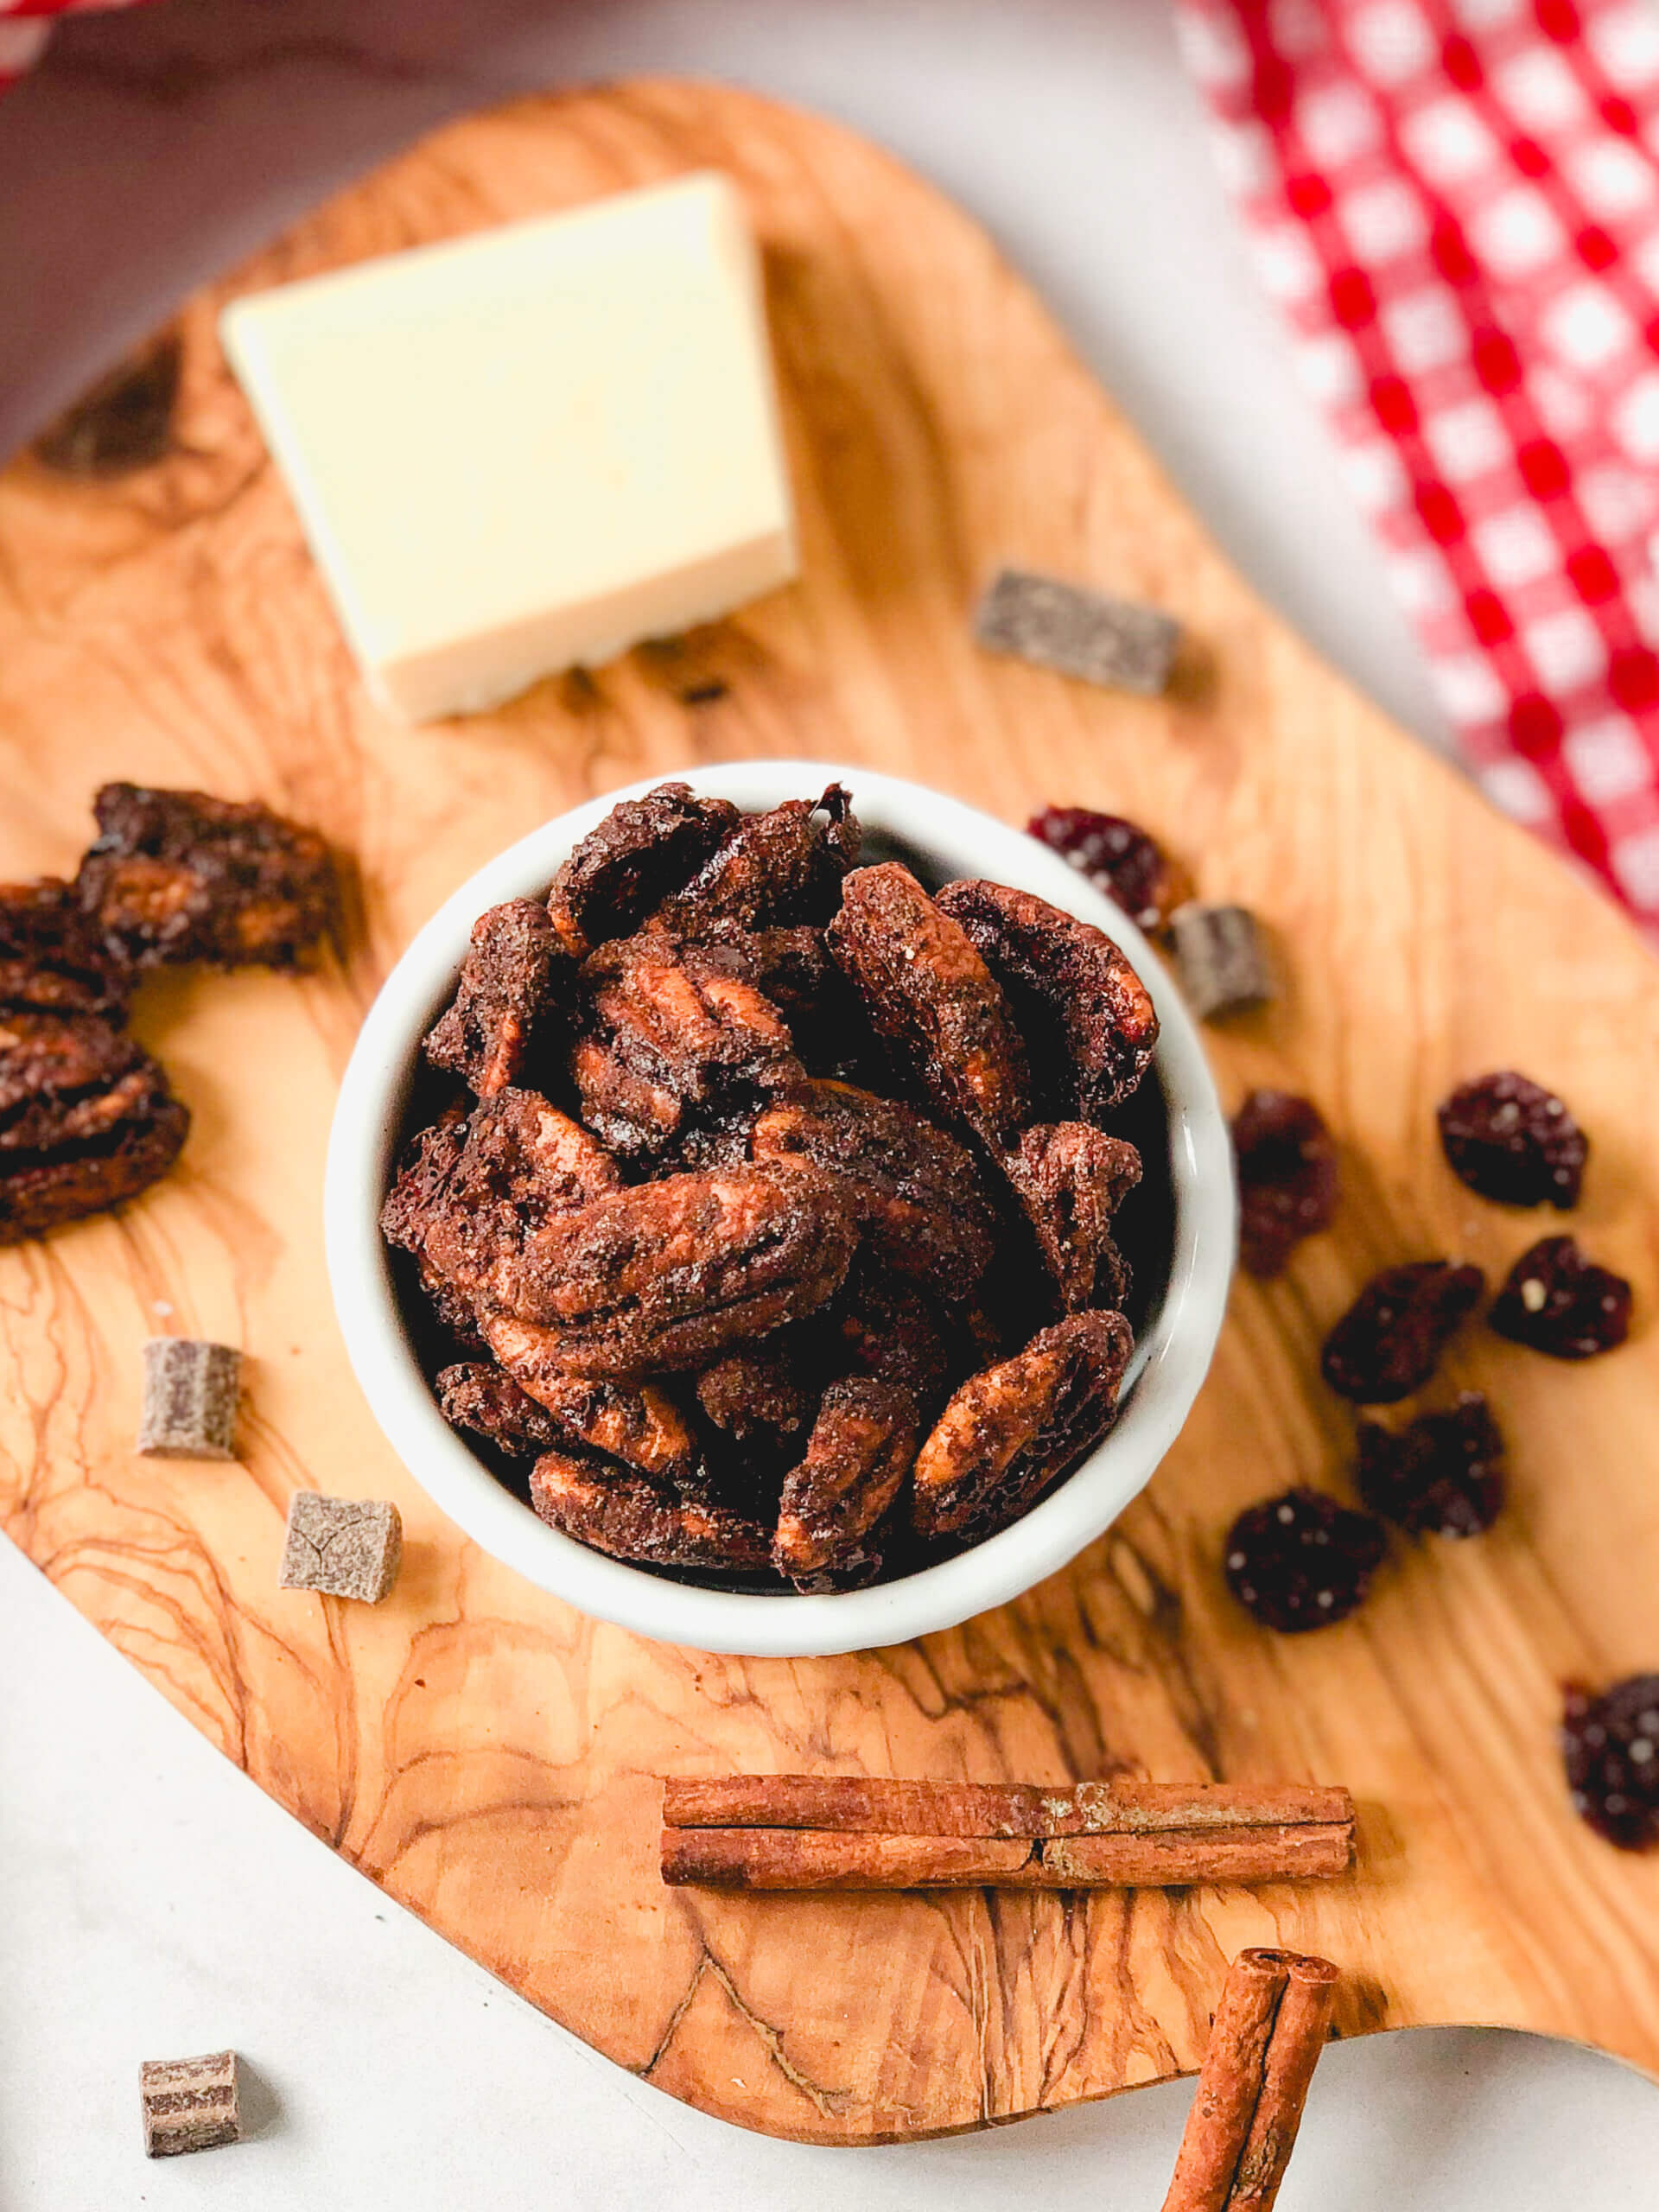 Serve Spicy cocoa pecans as part of fruit and cheese board. They are cinnamony, cocoa-y and spicy!